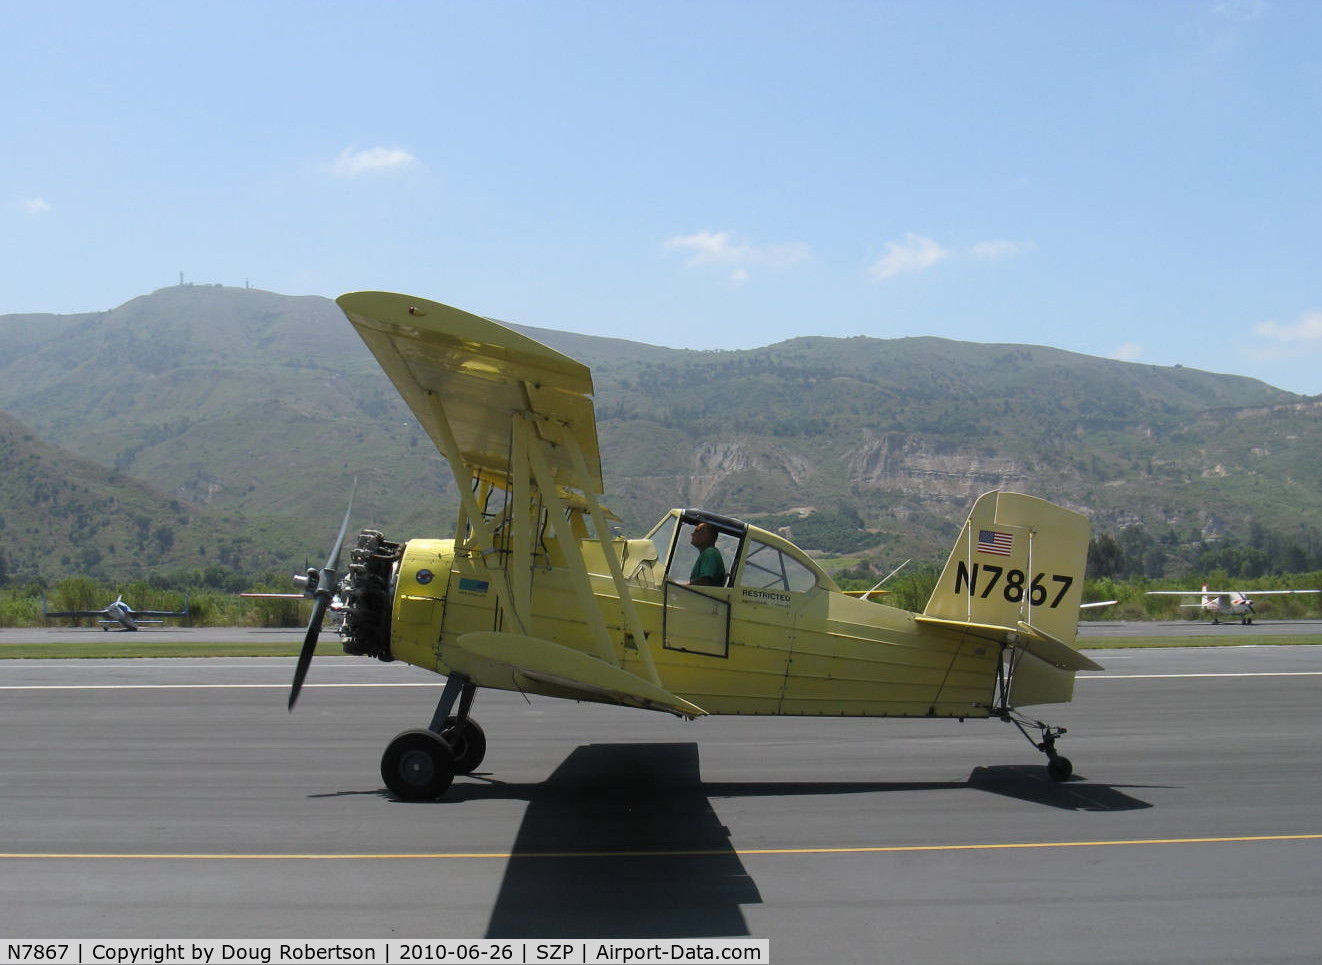 N7867, 1972 Grumman-Schweizer G-164A C/N 999, Grumman-Schweizer G-164A AG-CAT, P&W R-1340 Wasp 600 Hp, taxi